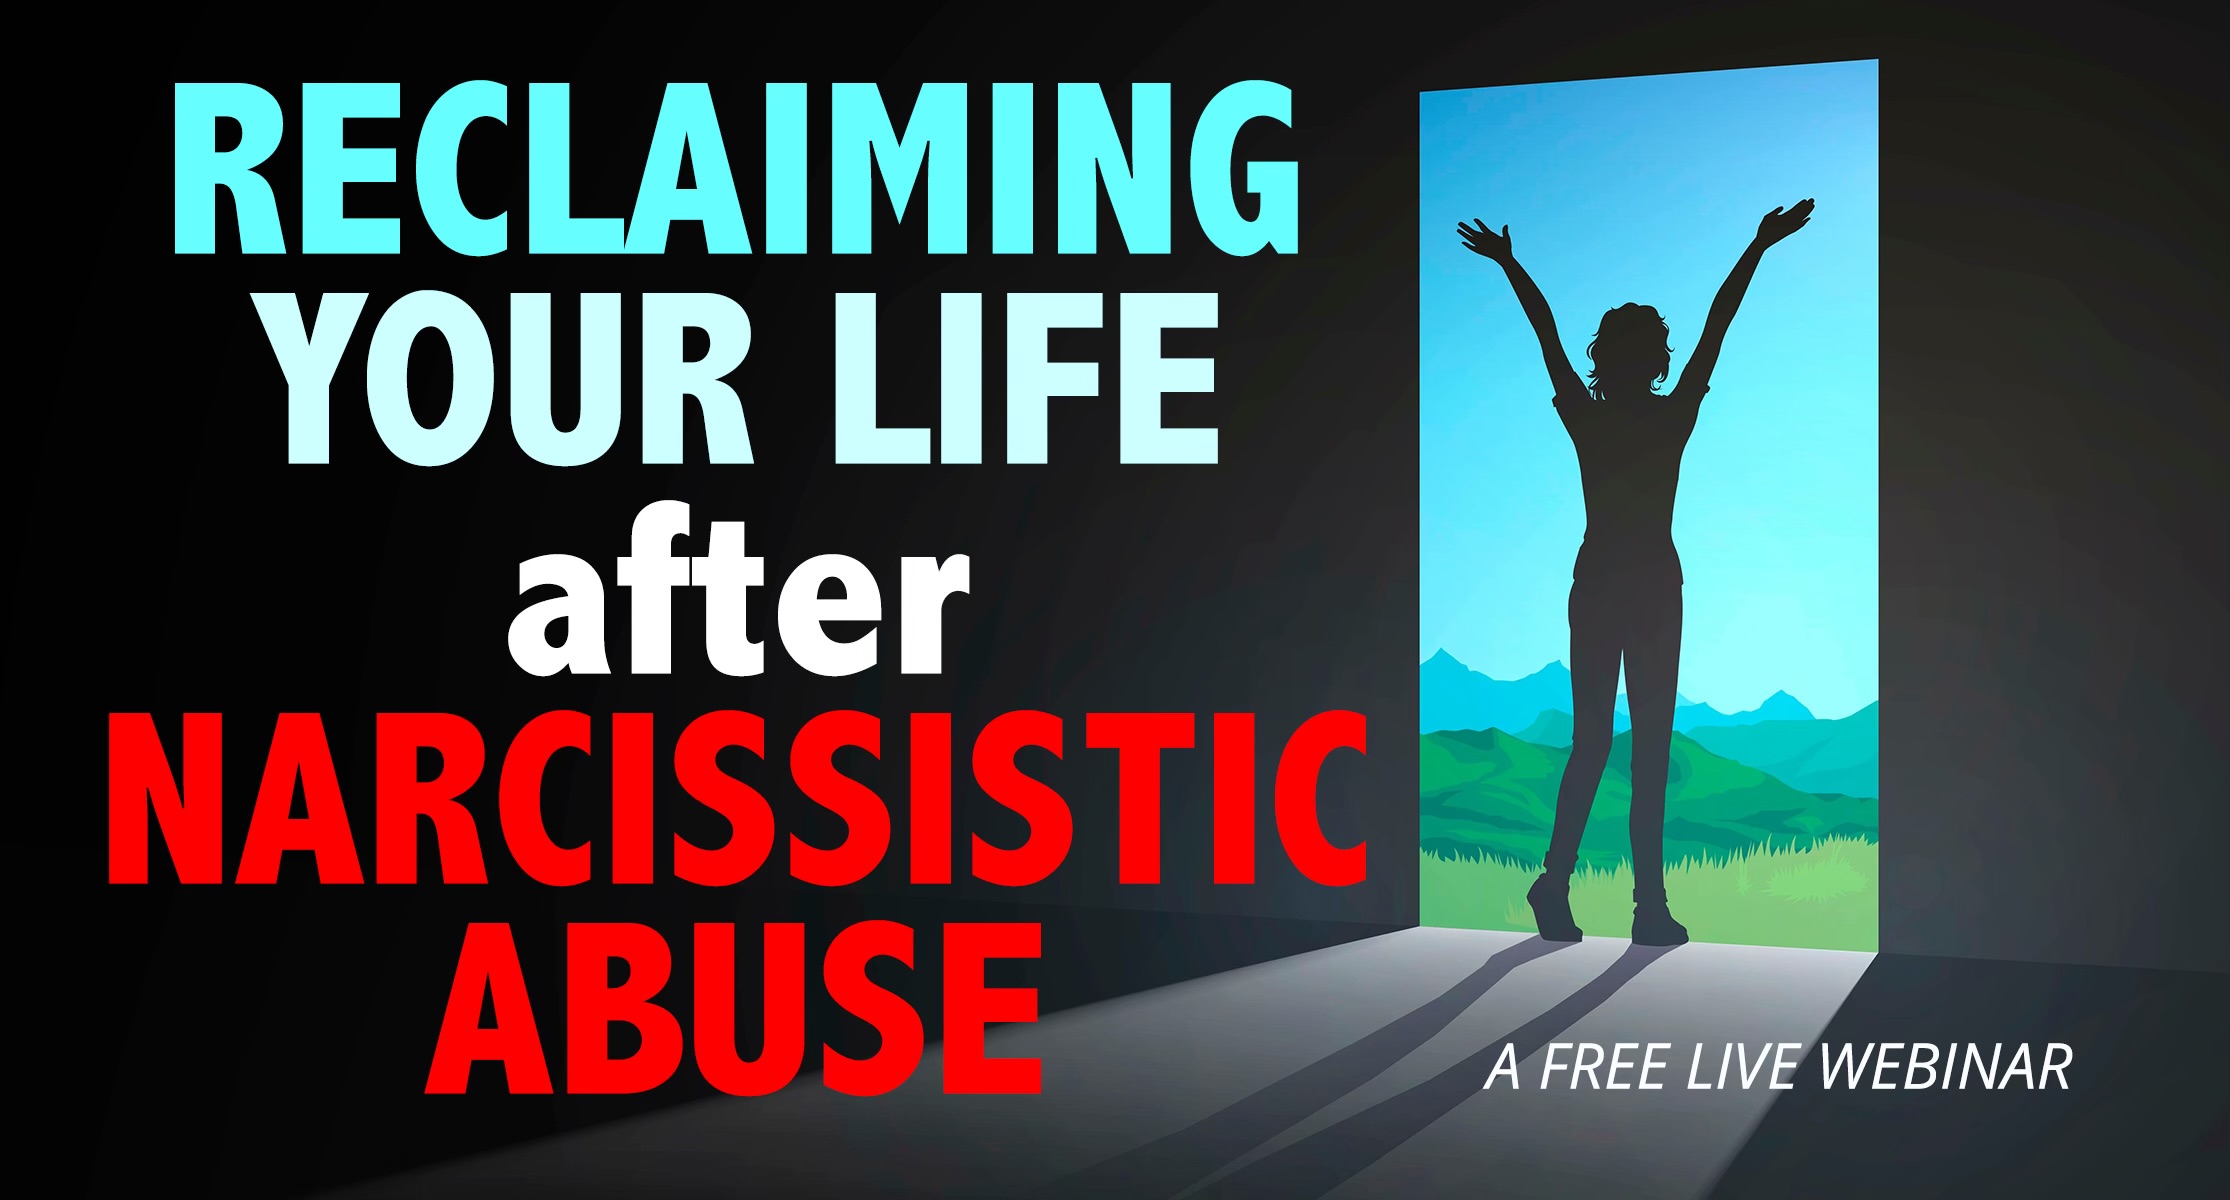 Reclaiming Your Life After Narcissistic